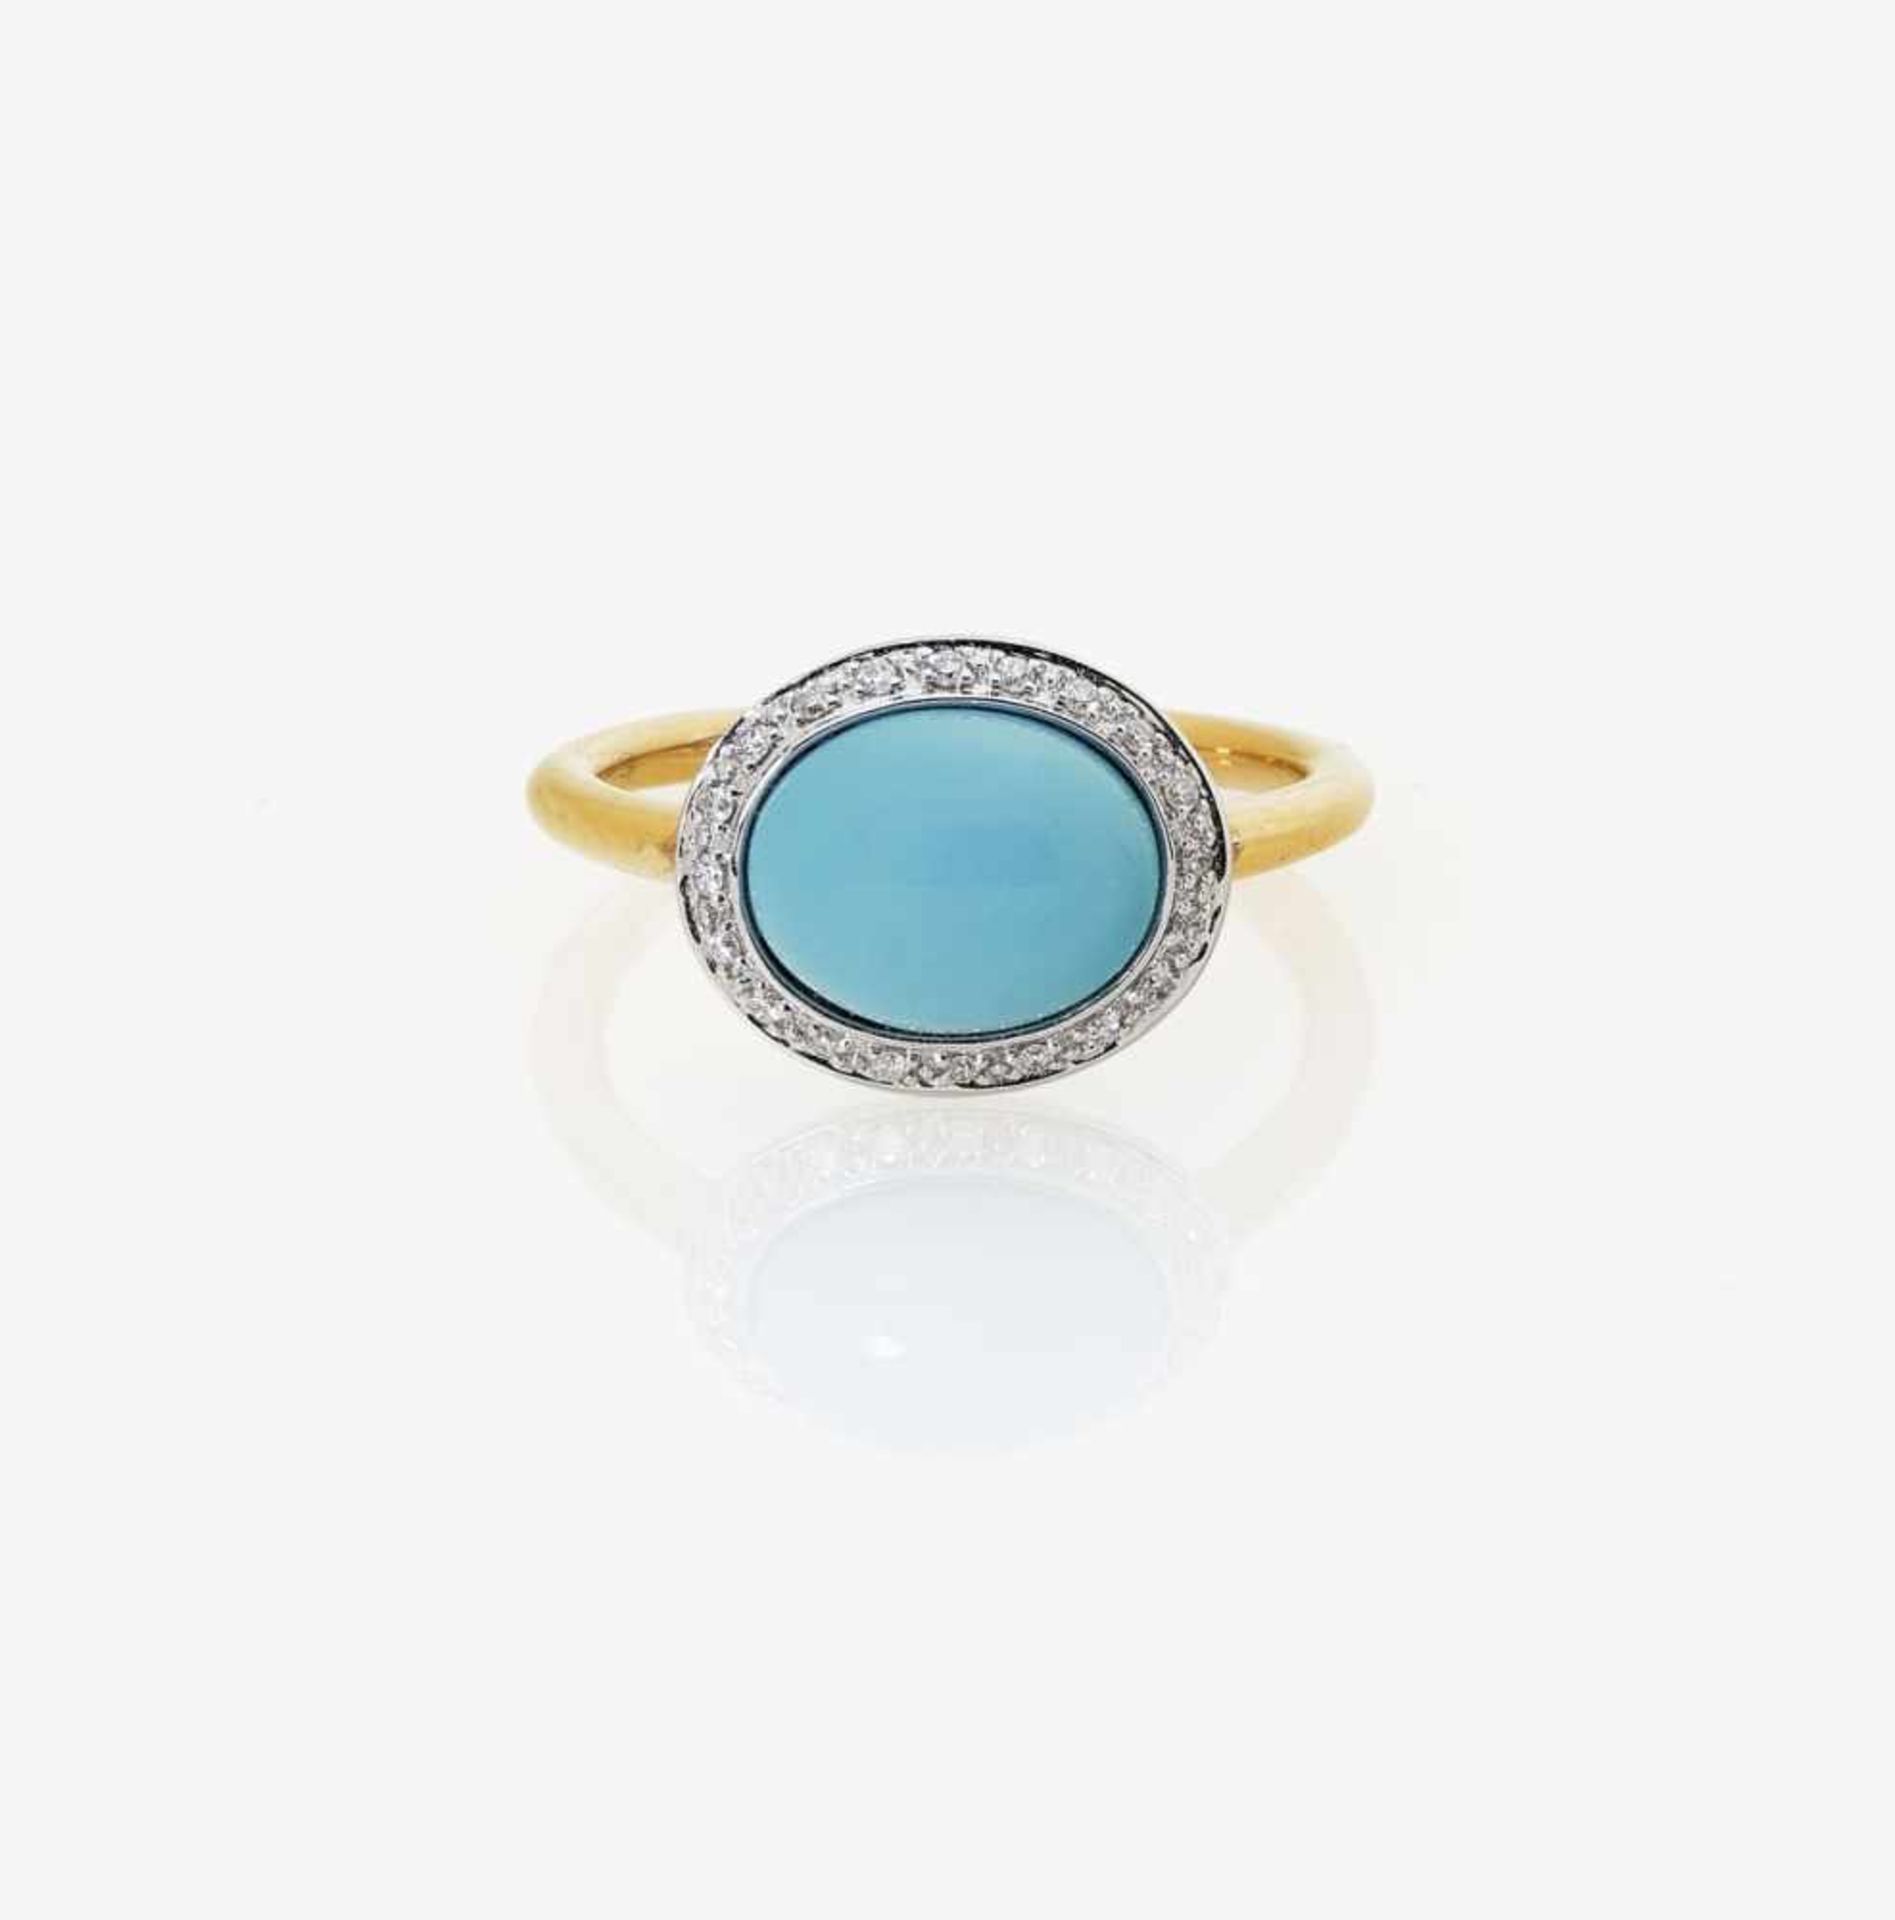 A Turquoise and Diamond RingItaly, MIMI 18K white and rose gold (750/-), stamped. Signed Mimi. 20